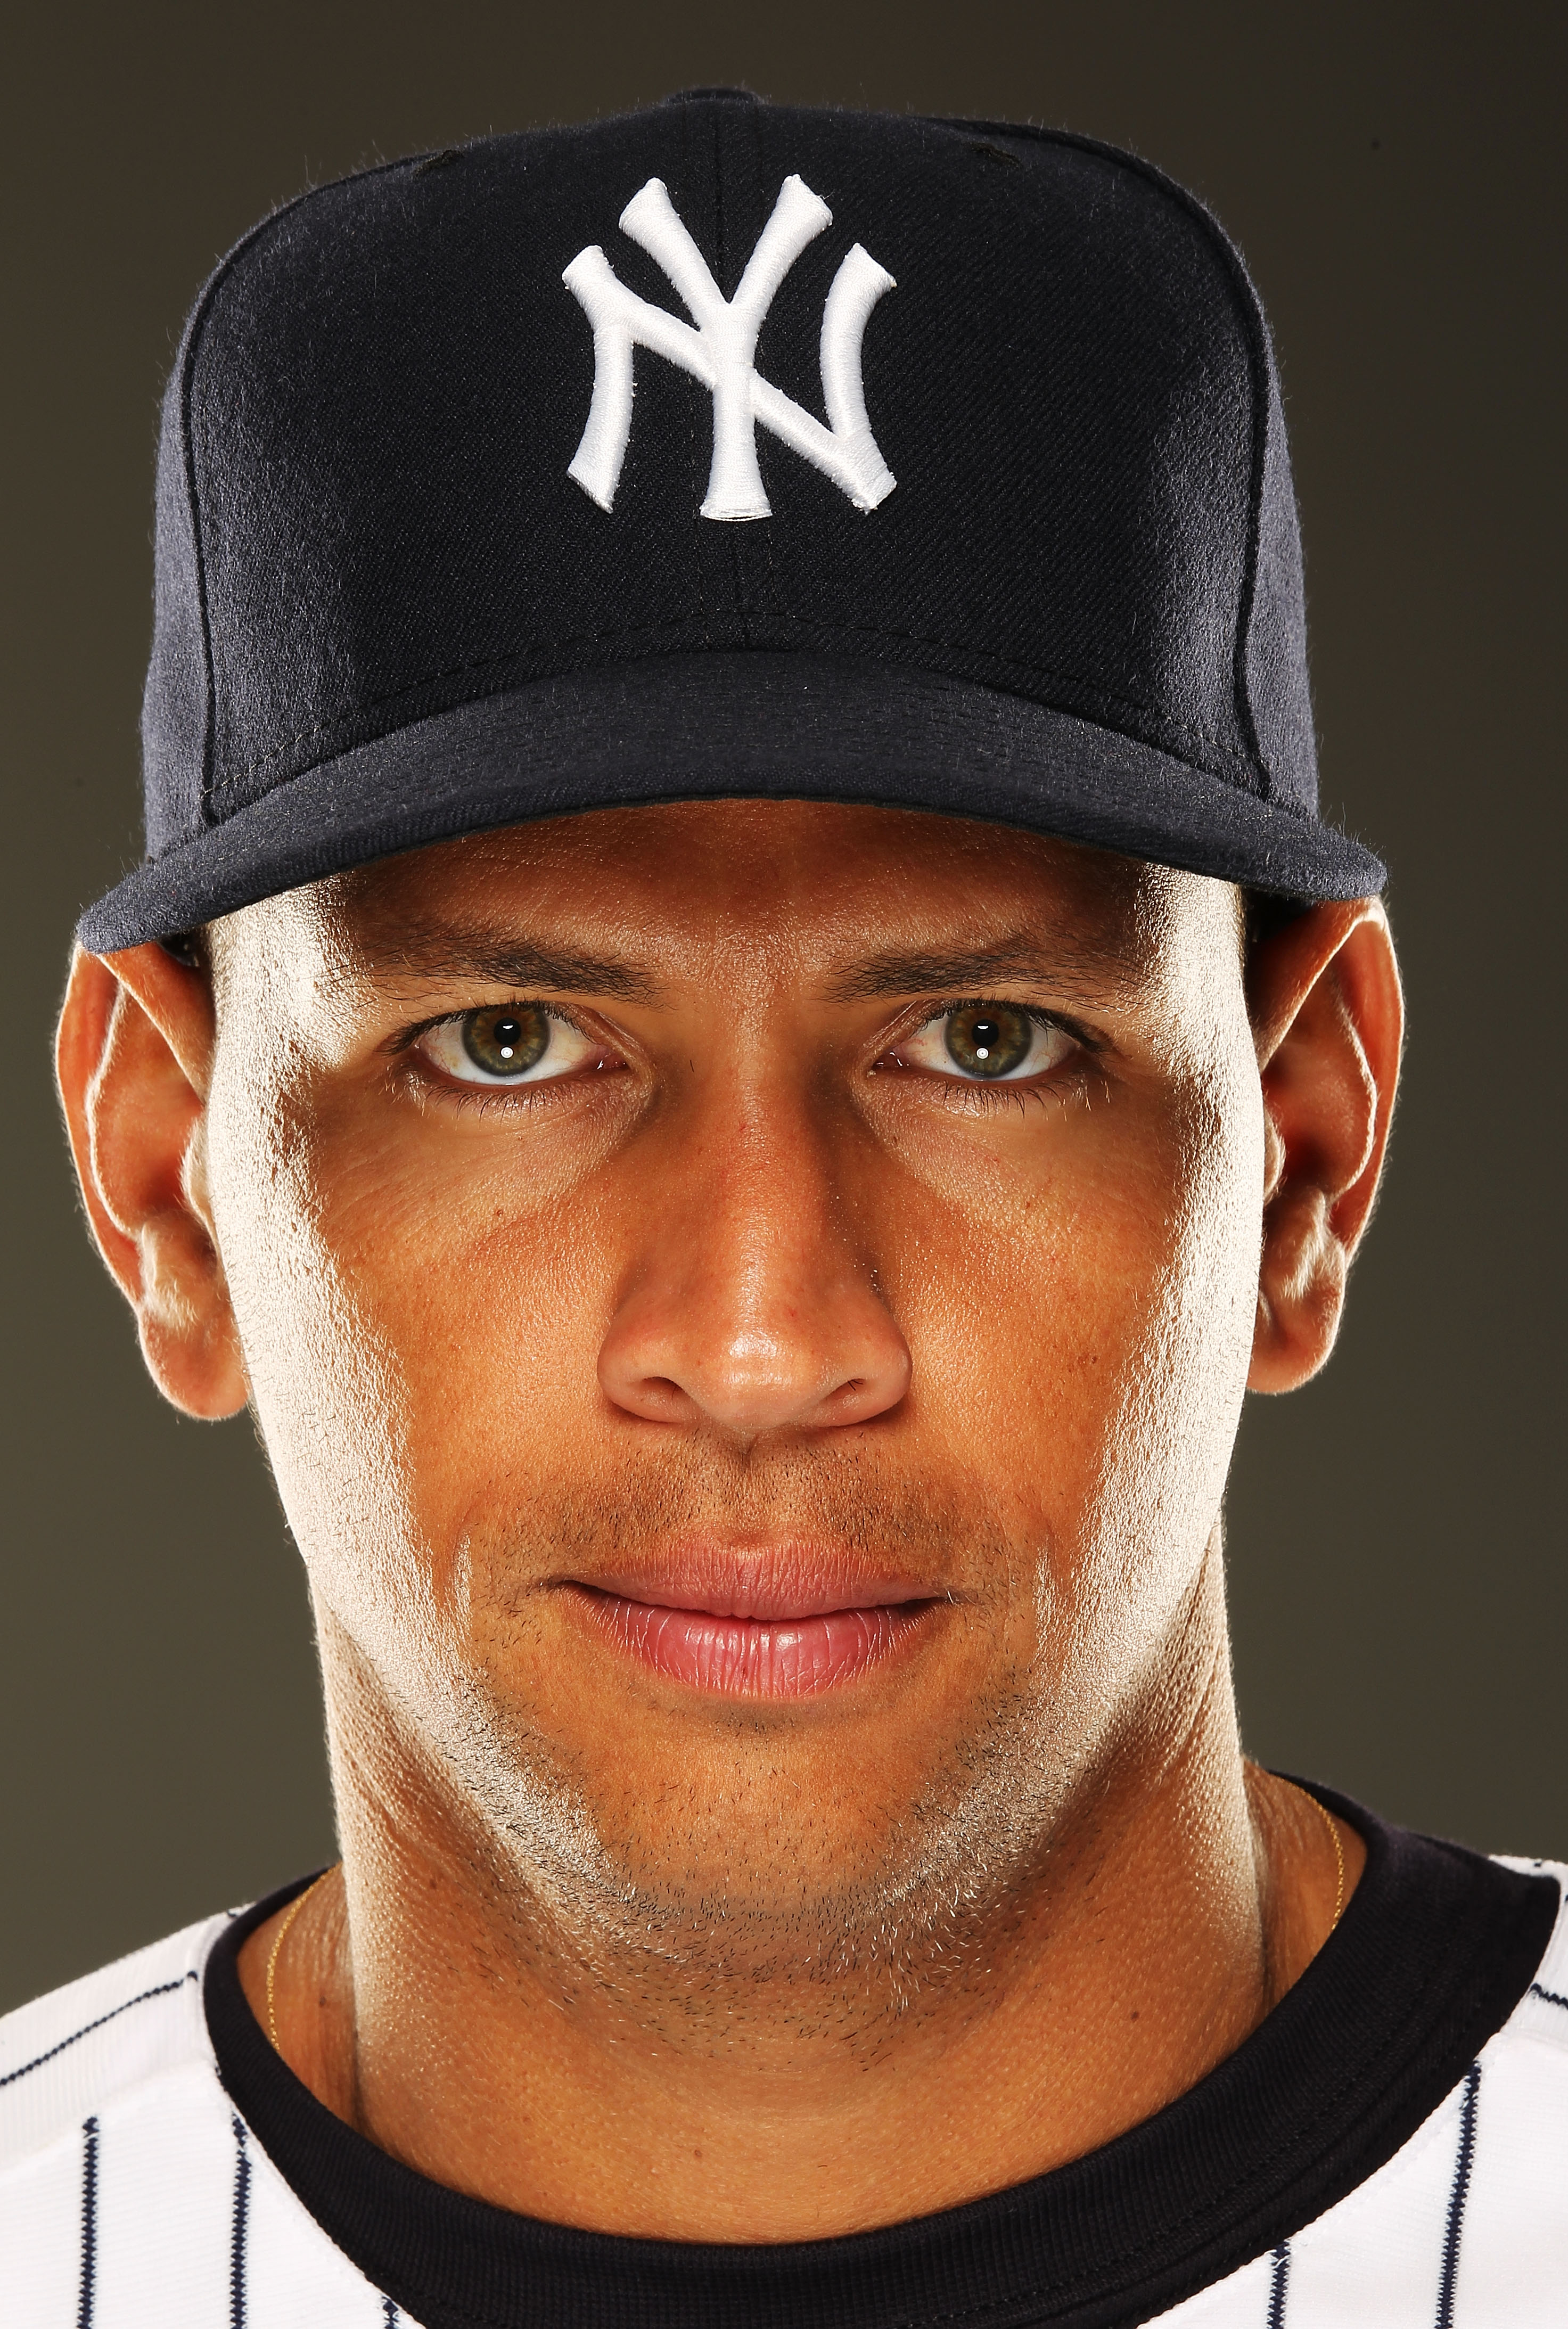 TAMPA, FL - FEBRUARY 23:  Alex Rodriguez #13 of the New York Yankees poses for a portrait on Photo Day at George M. Steinbrenner Field on February 23, 2011 in Tampa, Florida.  (Photo by Al Bello/Getty Images)